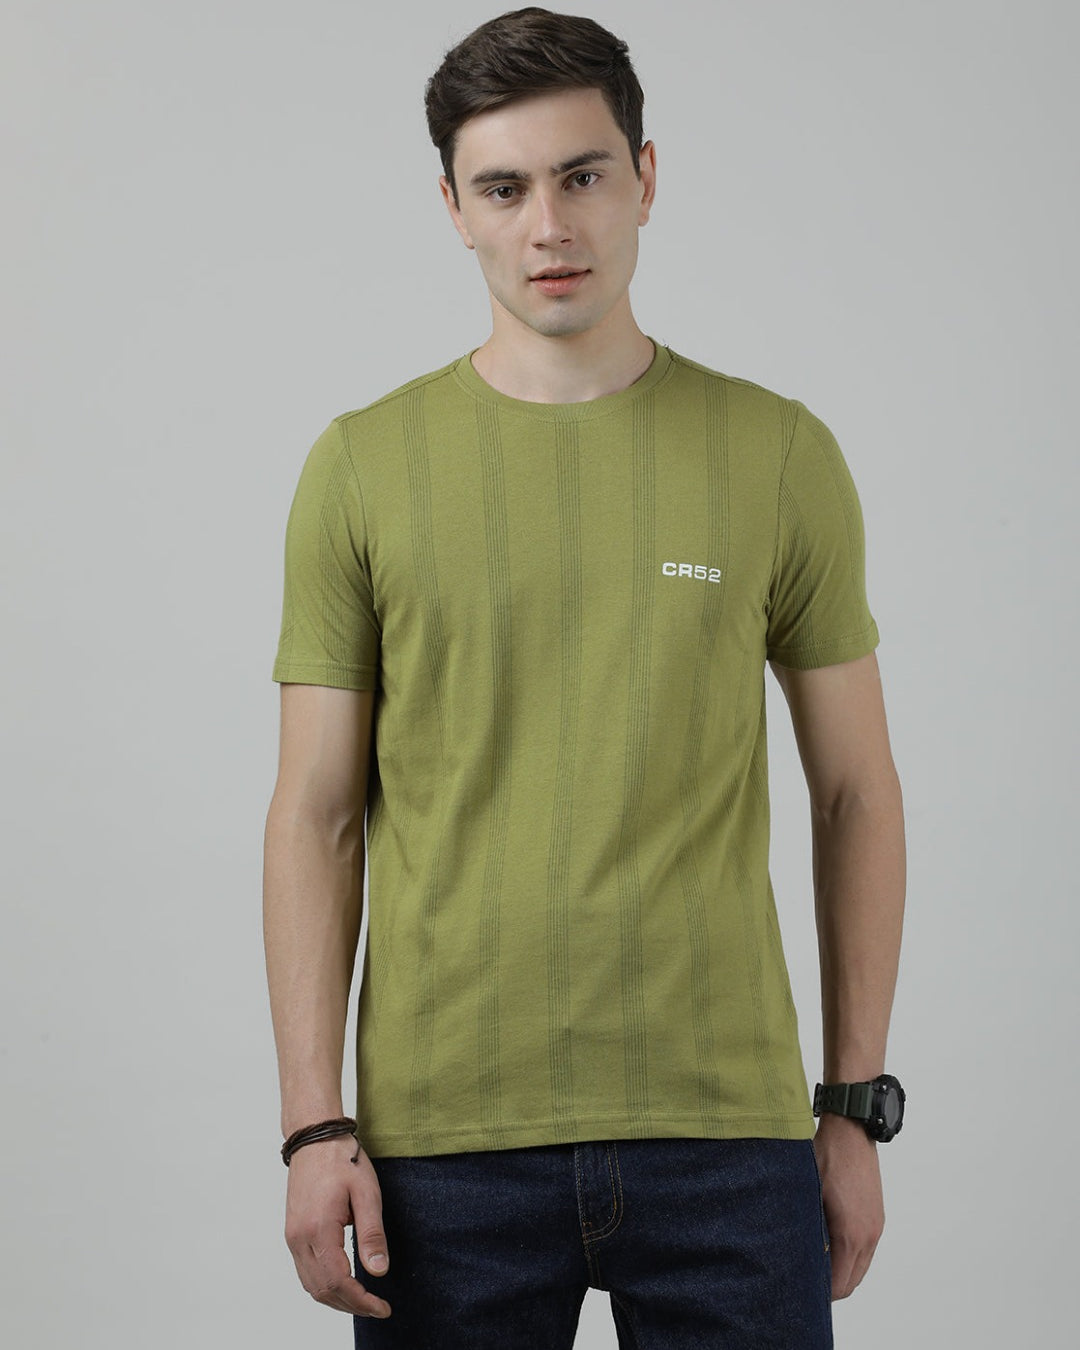 Casual Crew Neck Olive Printed T-Shirt Half Sleeve Slim Fit Jersey with Collar for Men